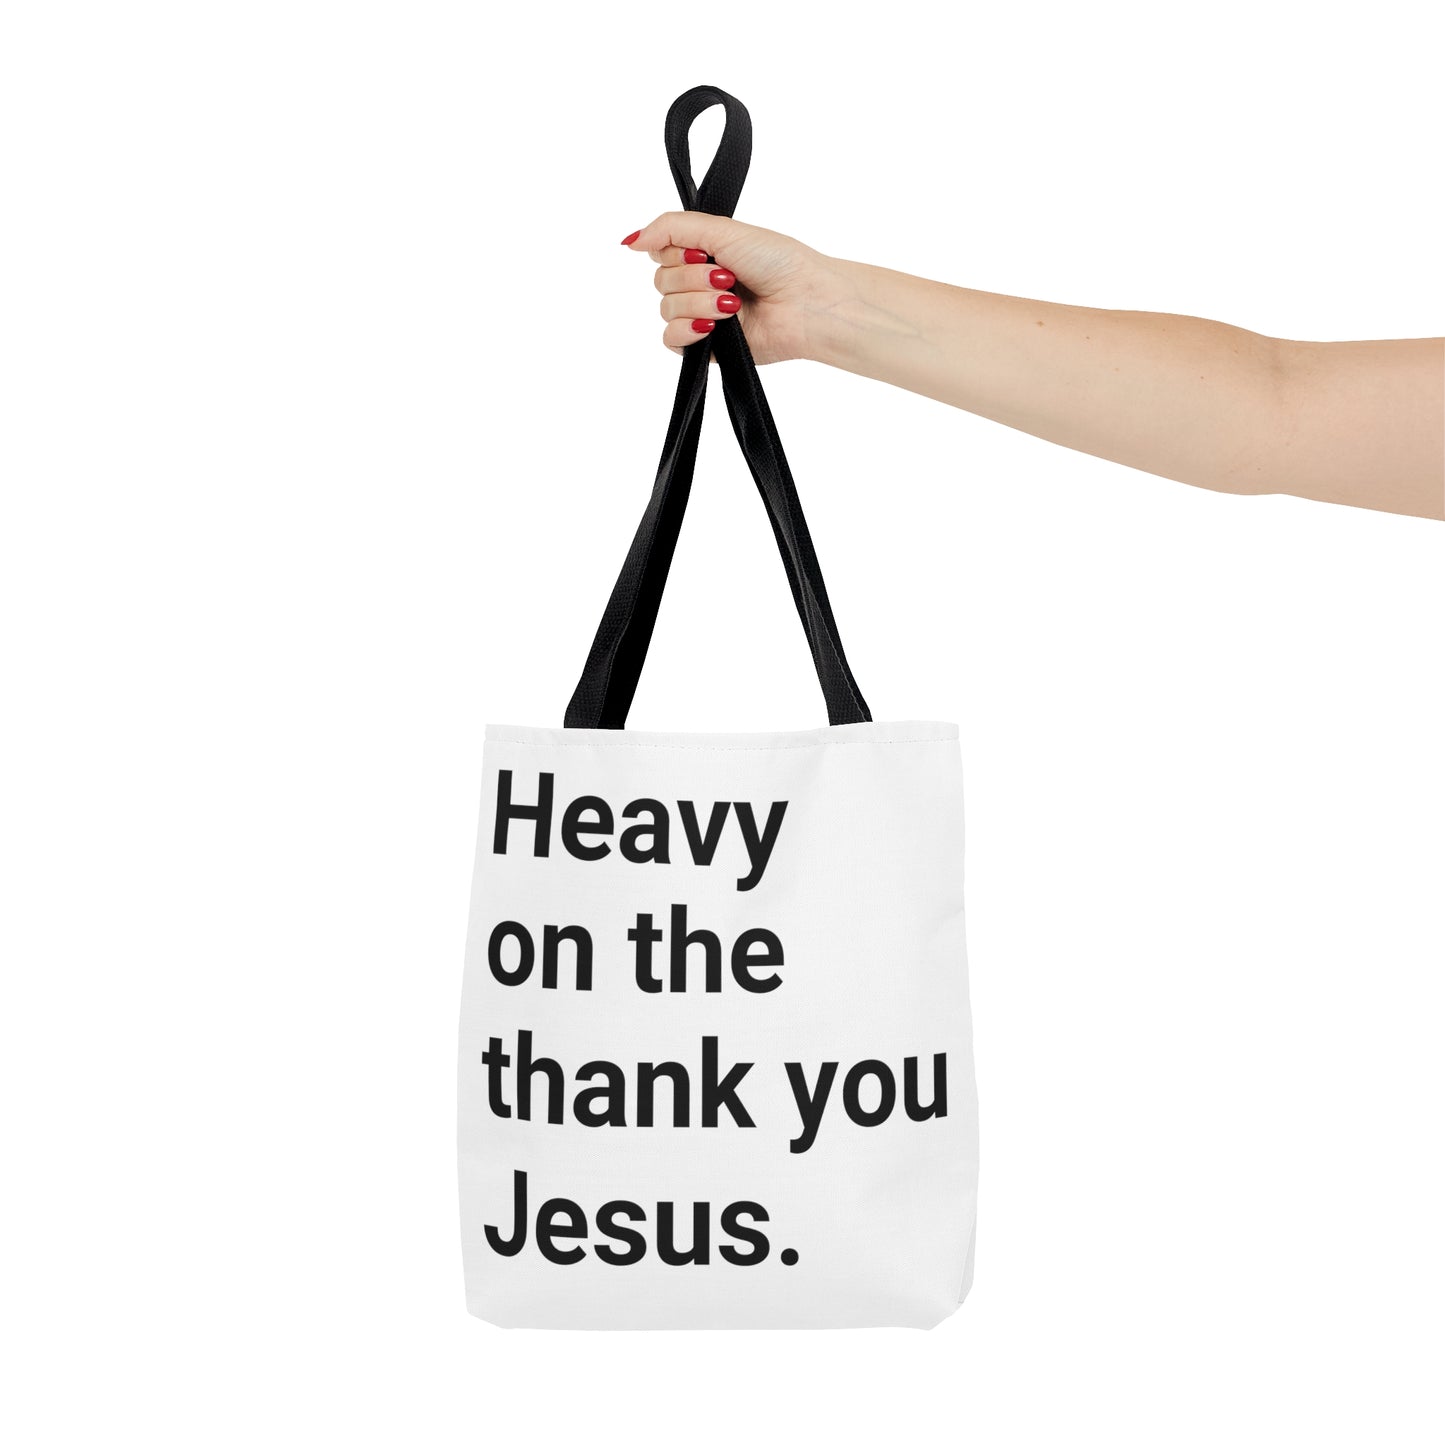 Heavy on the Thank you Jesus Tote Bag